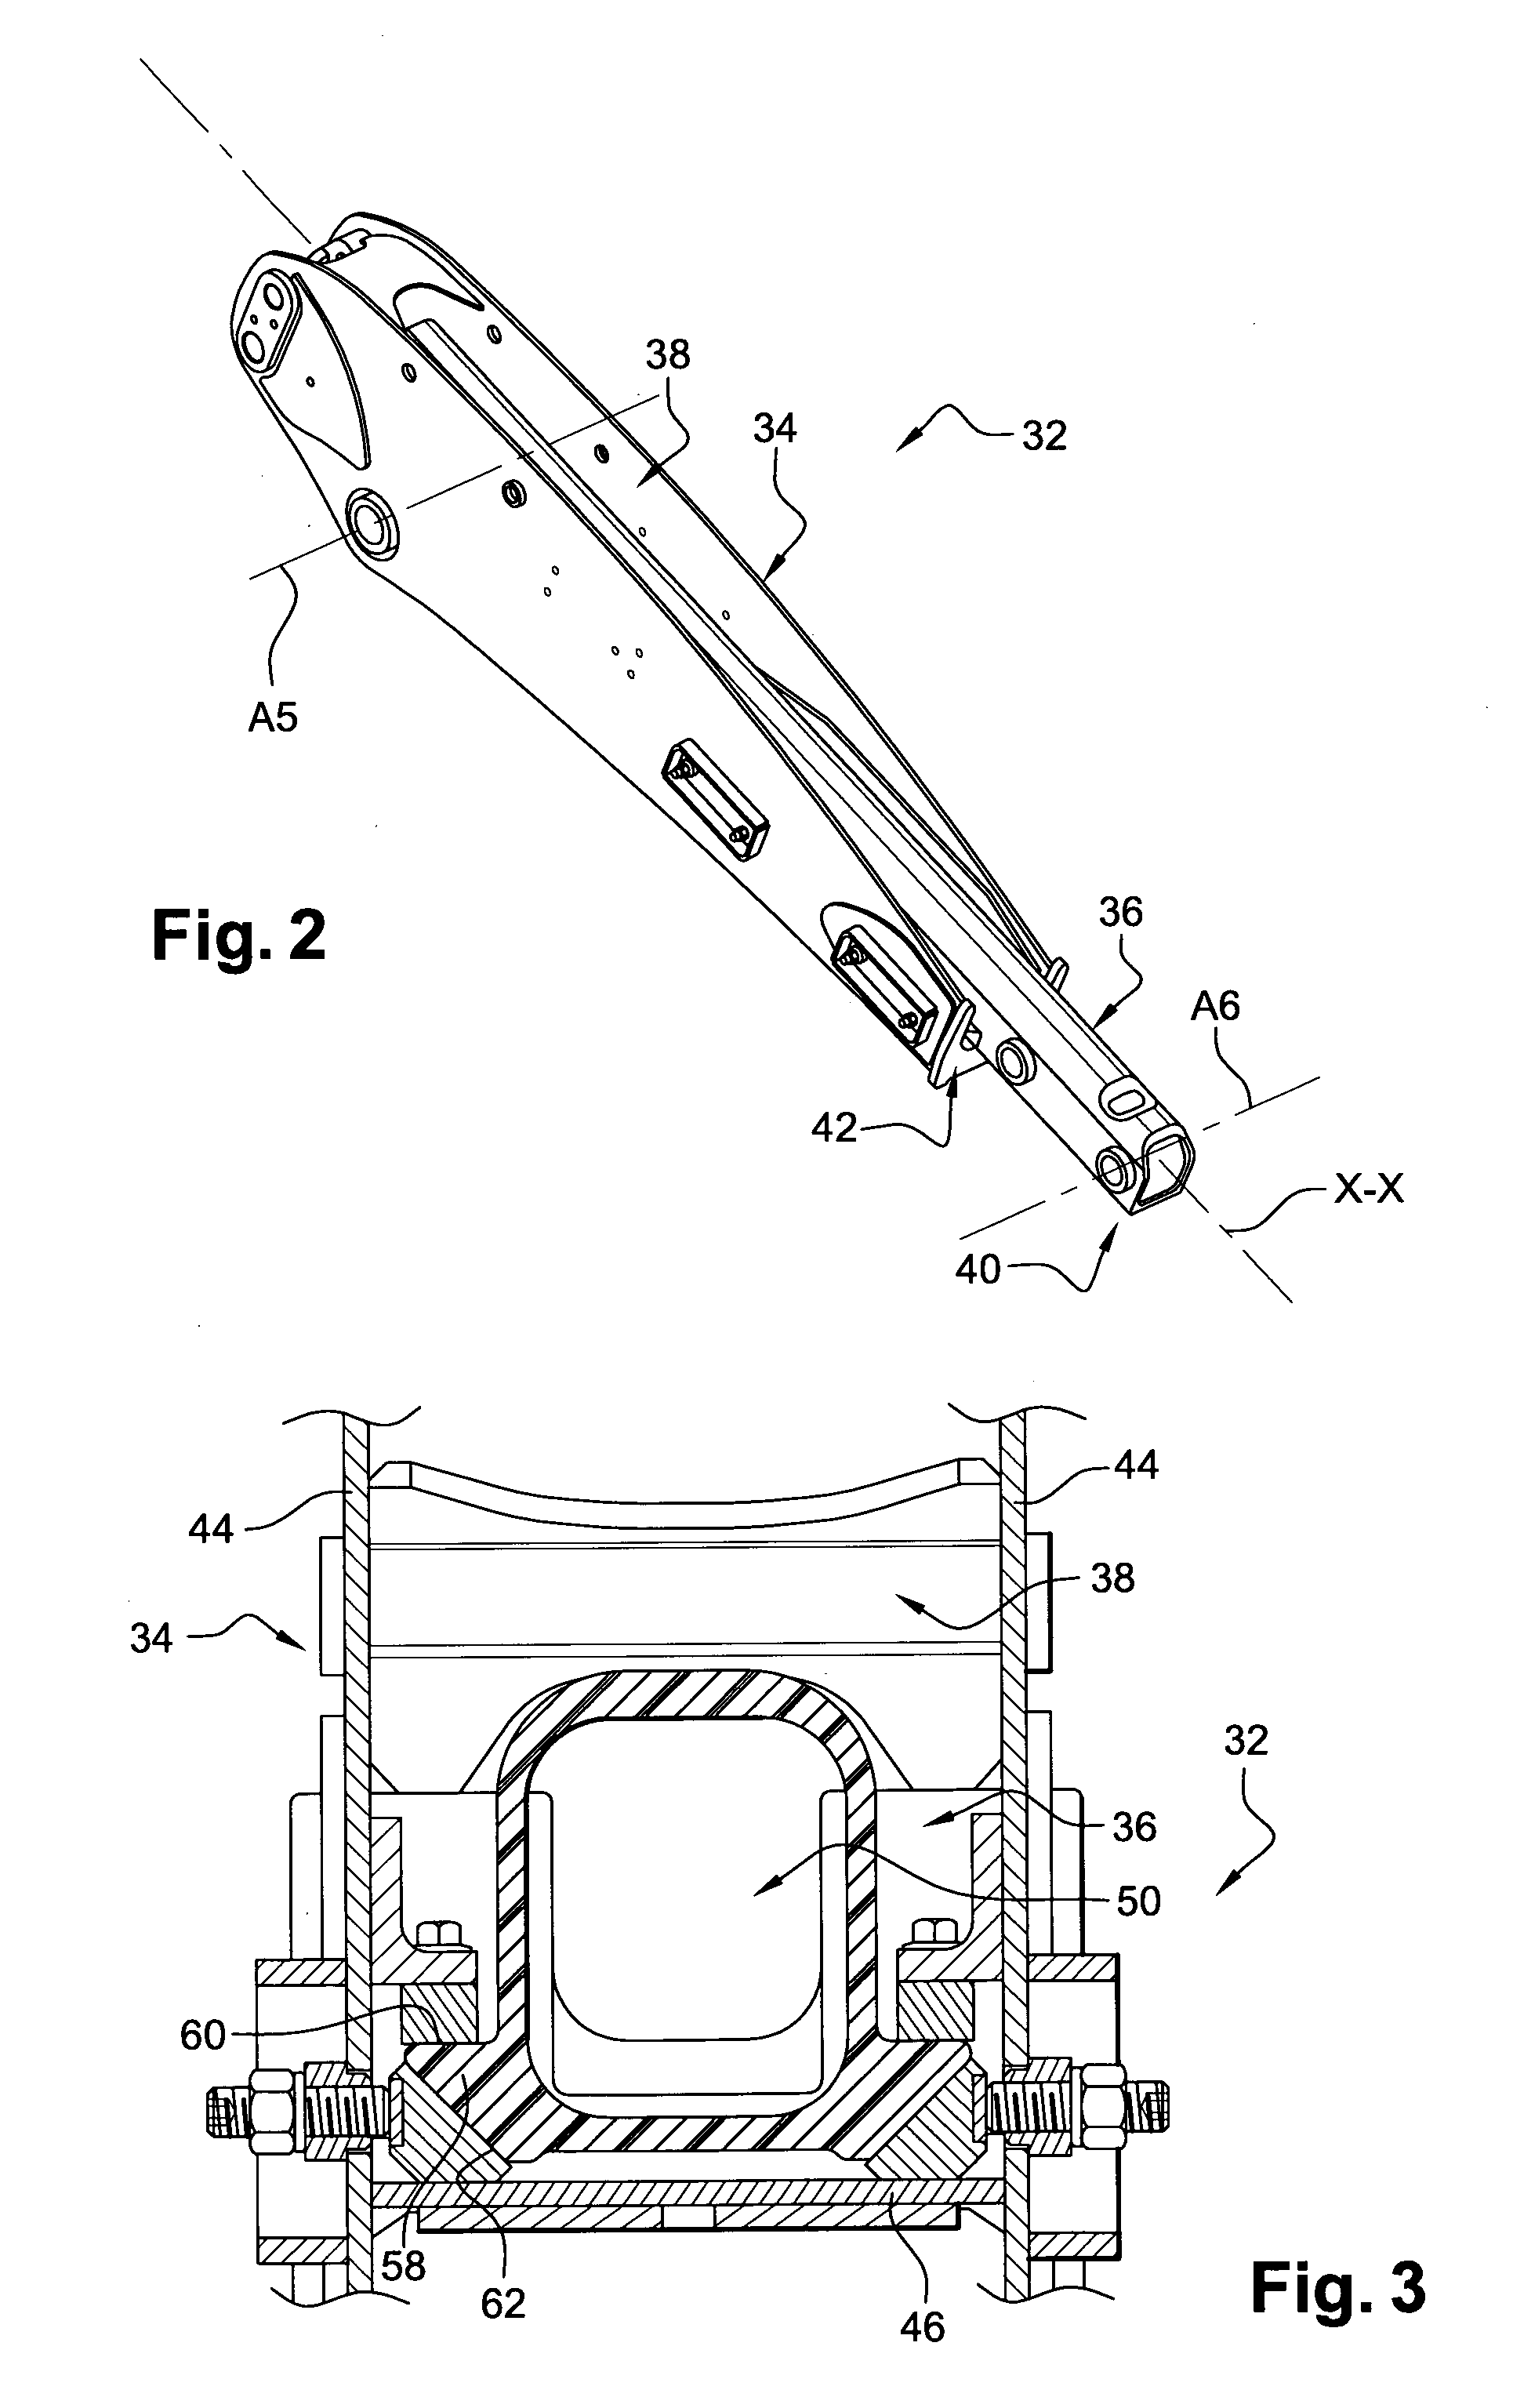 Extendible dipper with extruded portion for a backhoe arm